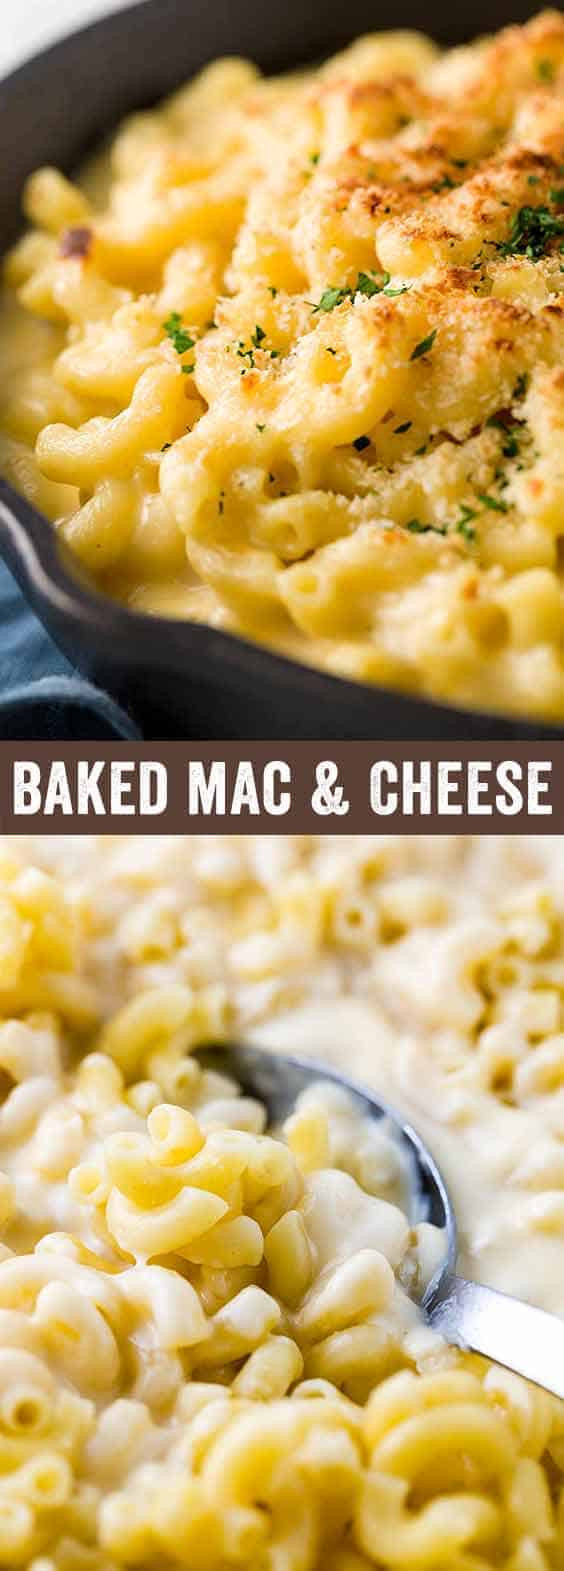 Recipe For Baked Macaroni And Cheese With Bread Crumbs
 Baked Macaroni and Cheese with Bread Crumb Topping